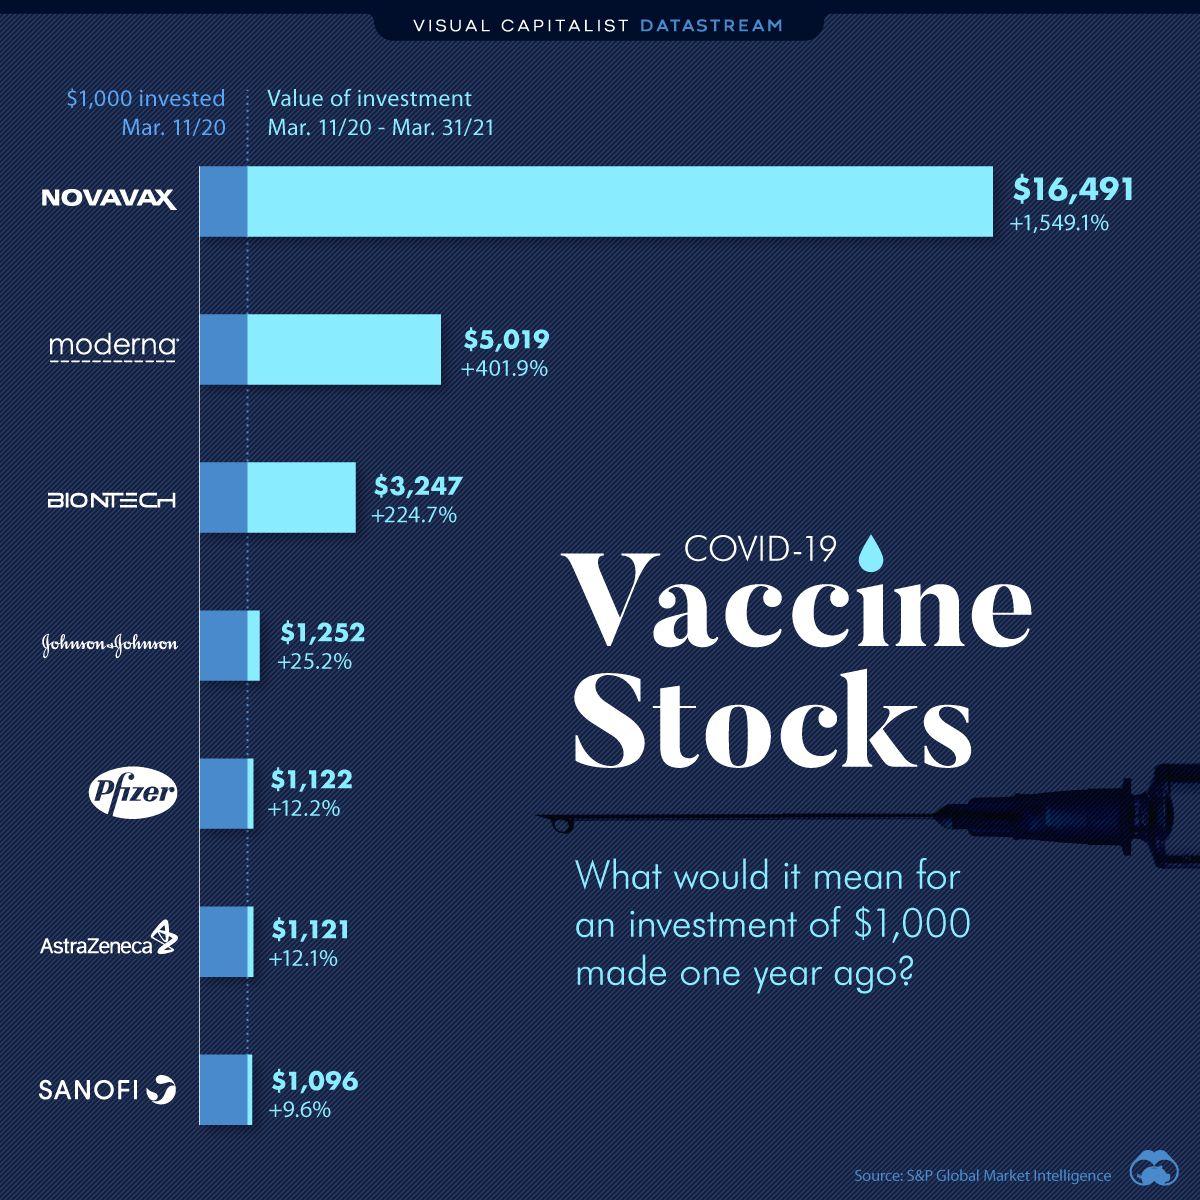 Vaccine stocks: what if you had invested one year ago?